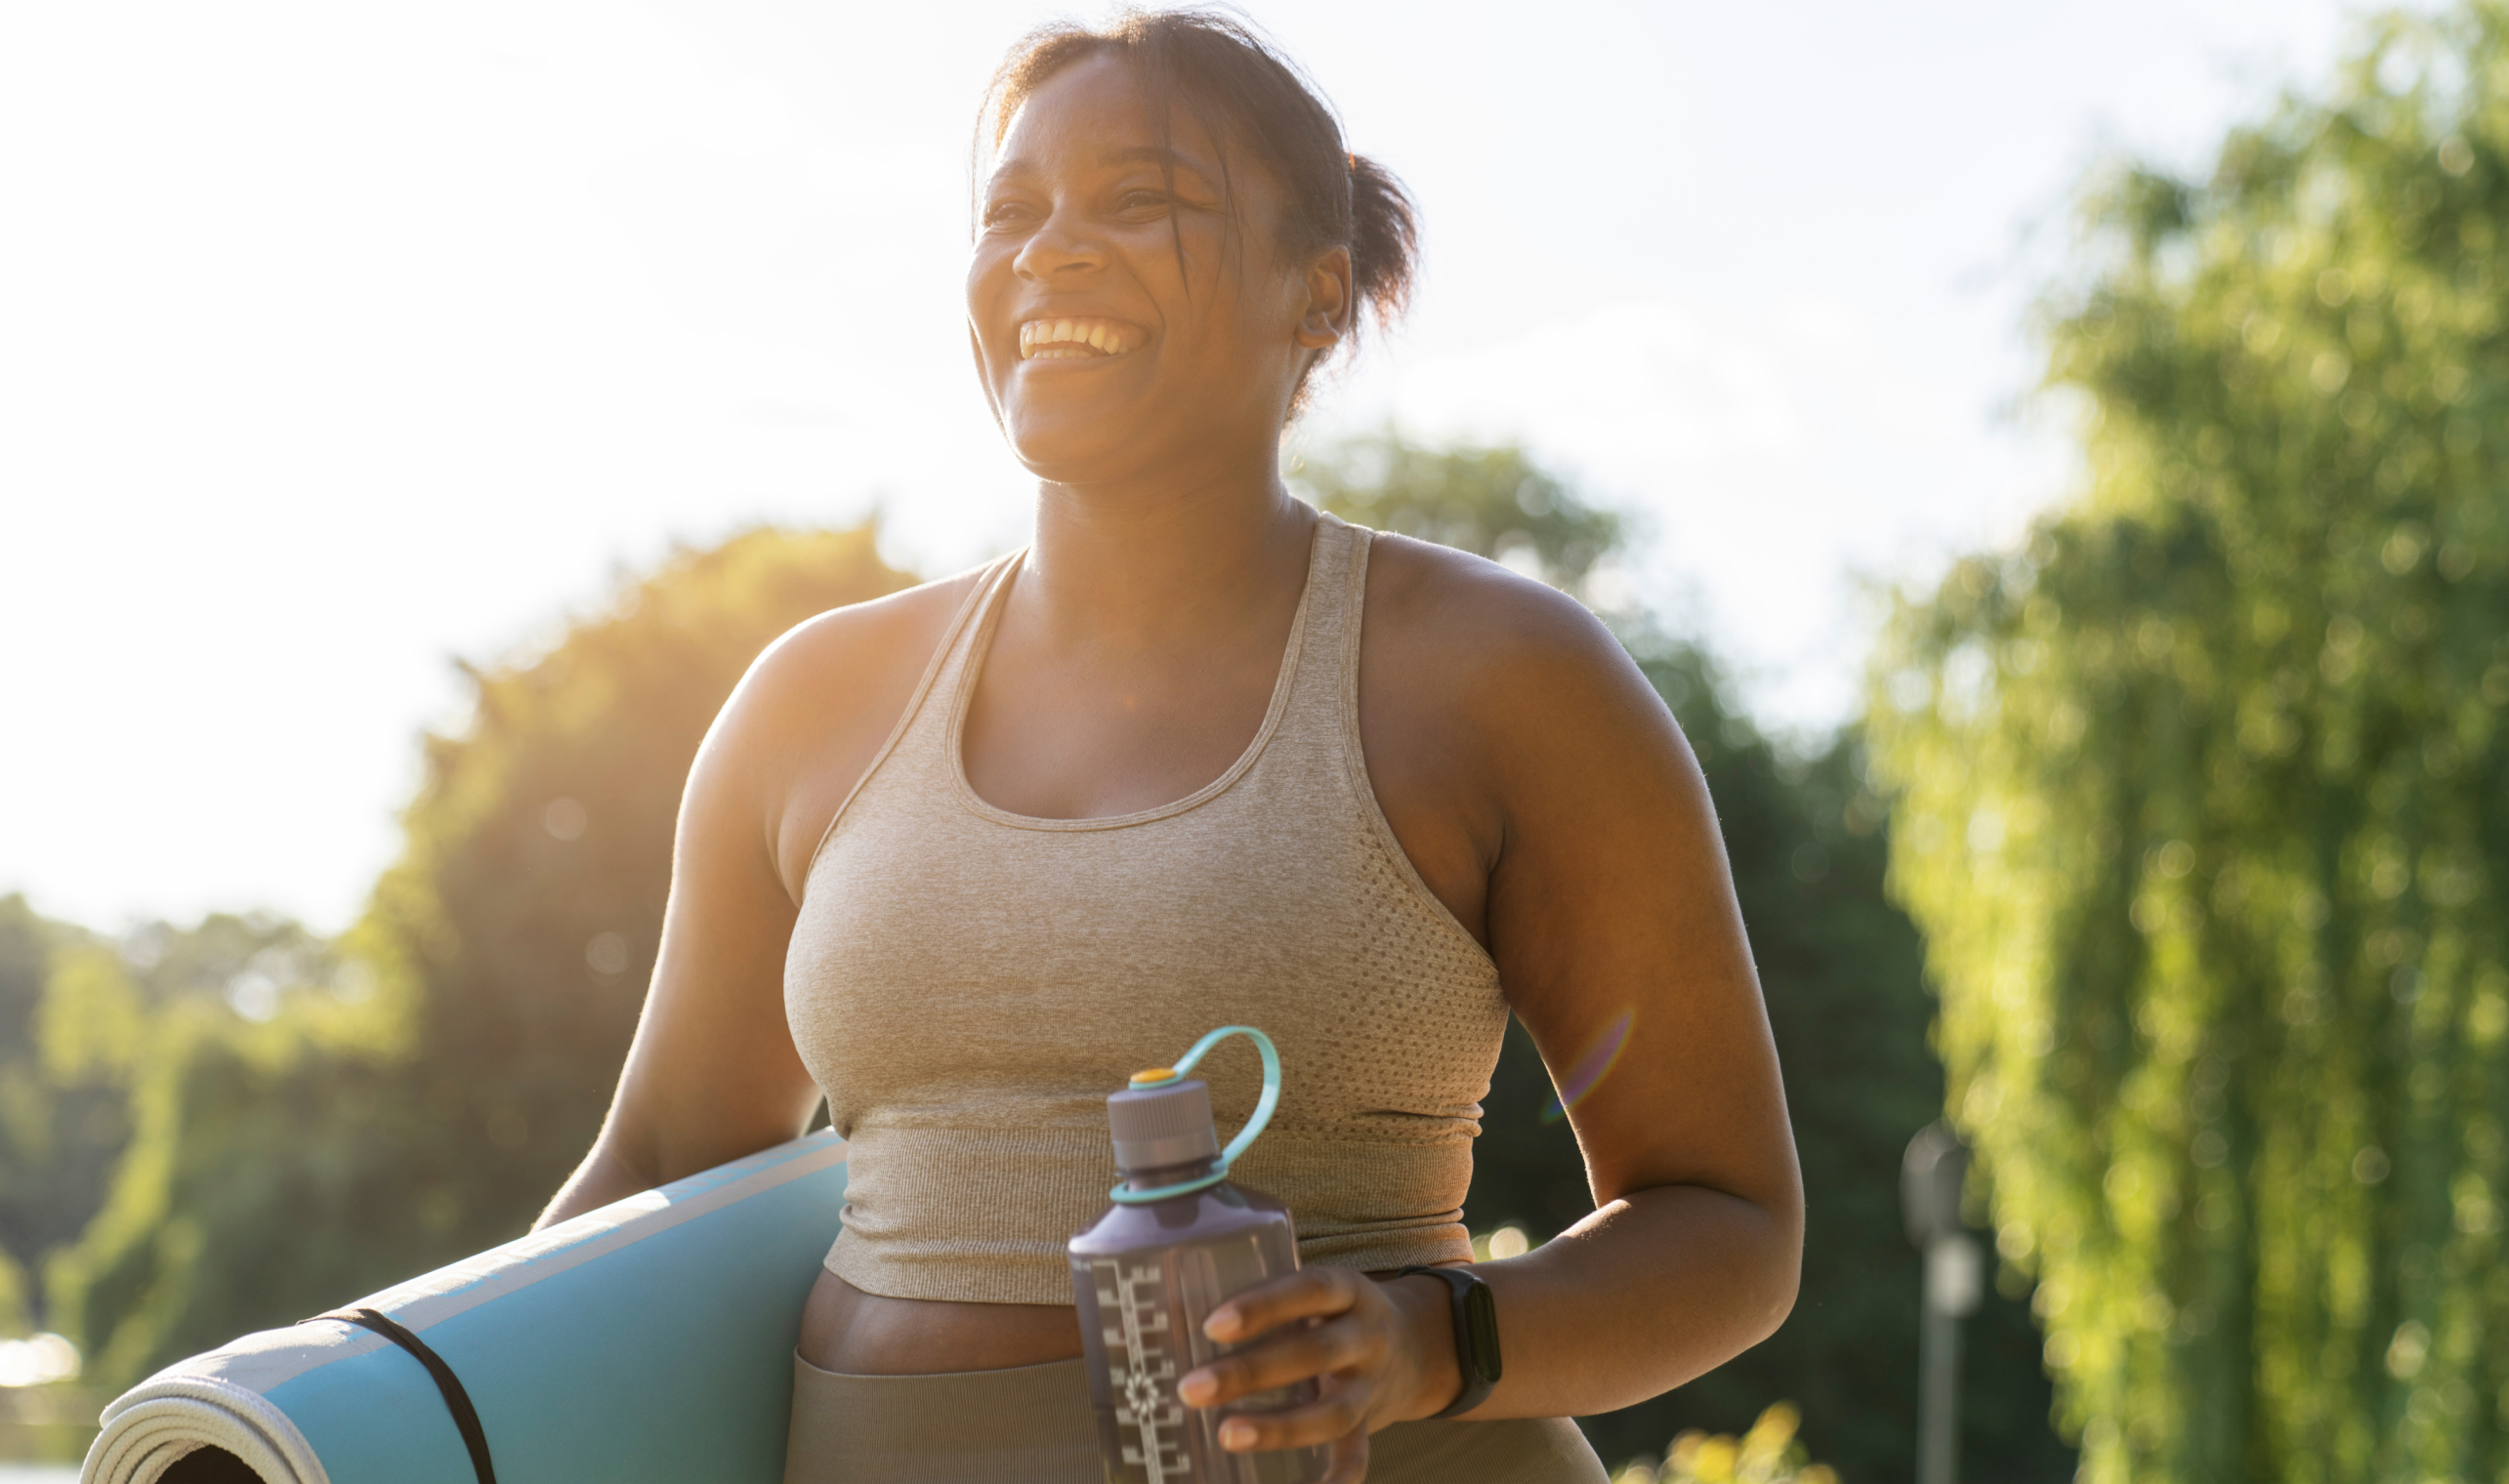 Person holding water bottle and yoga mat smiling